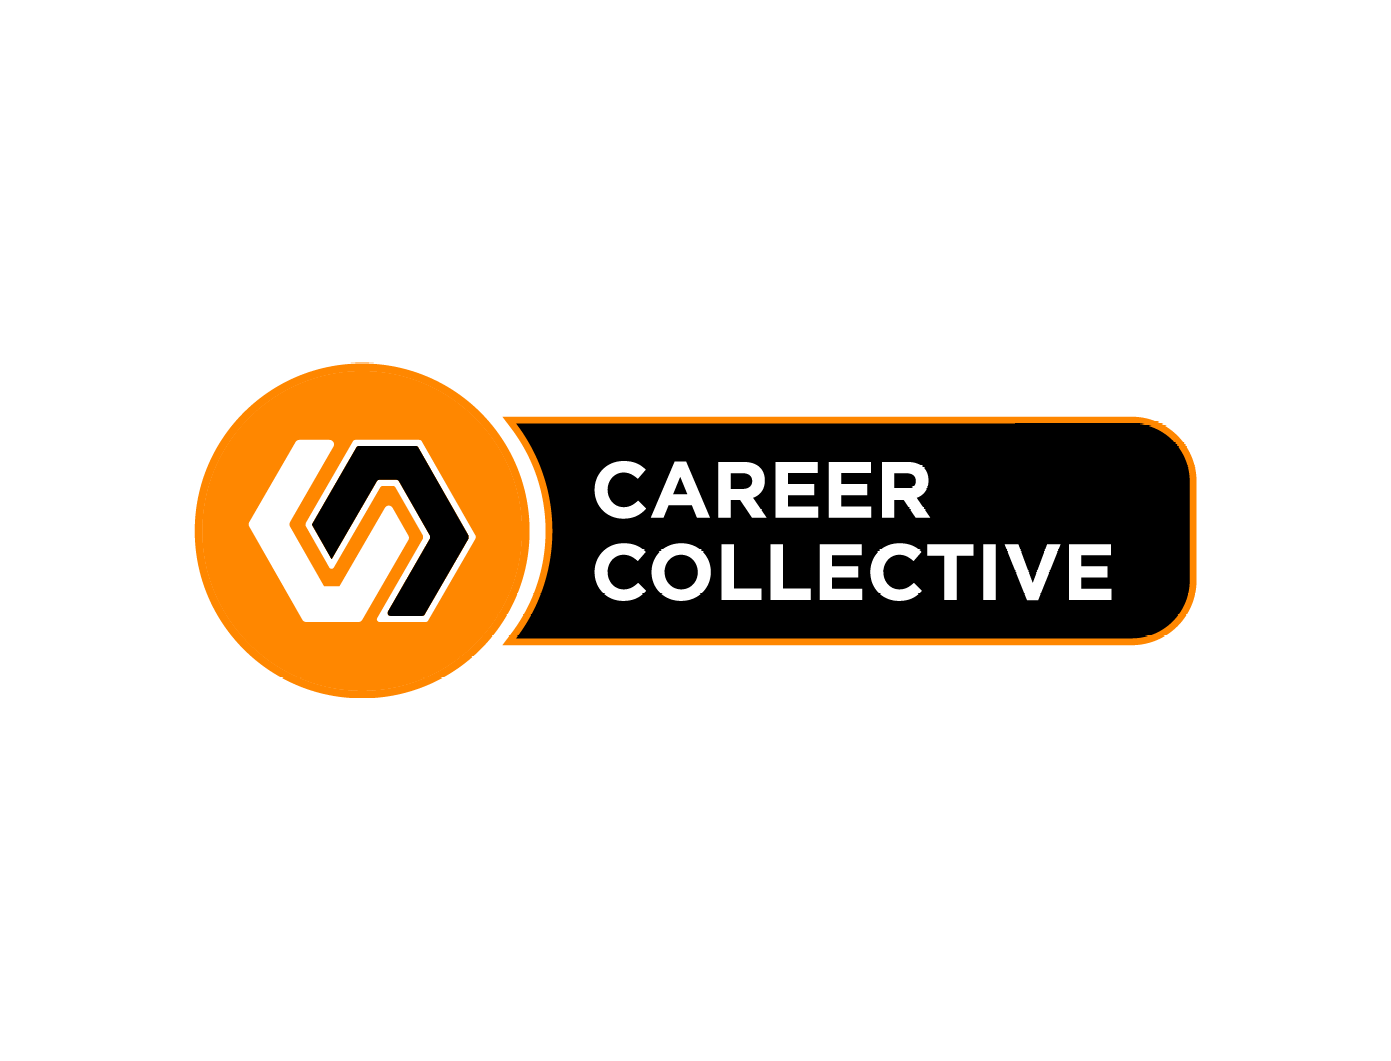 Top Talent Matched With the Best Employers - Career Collective